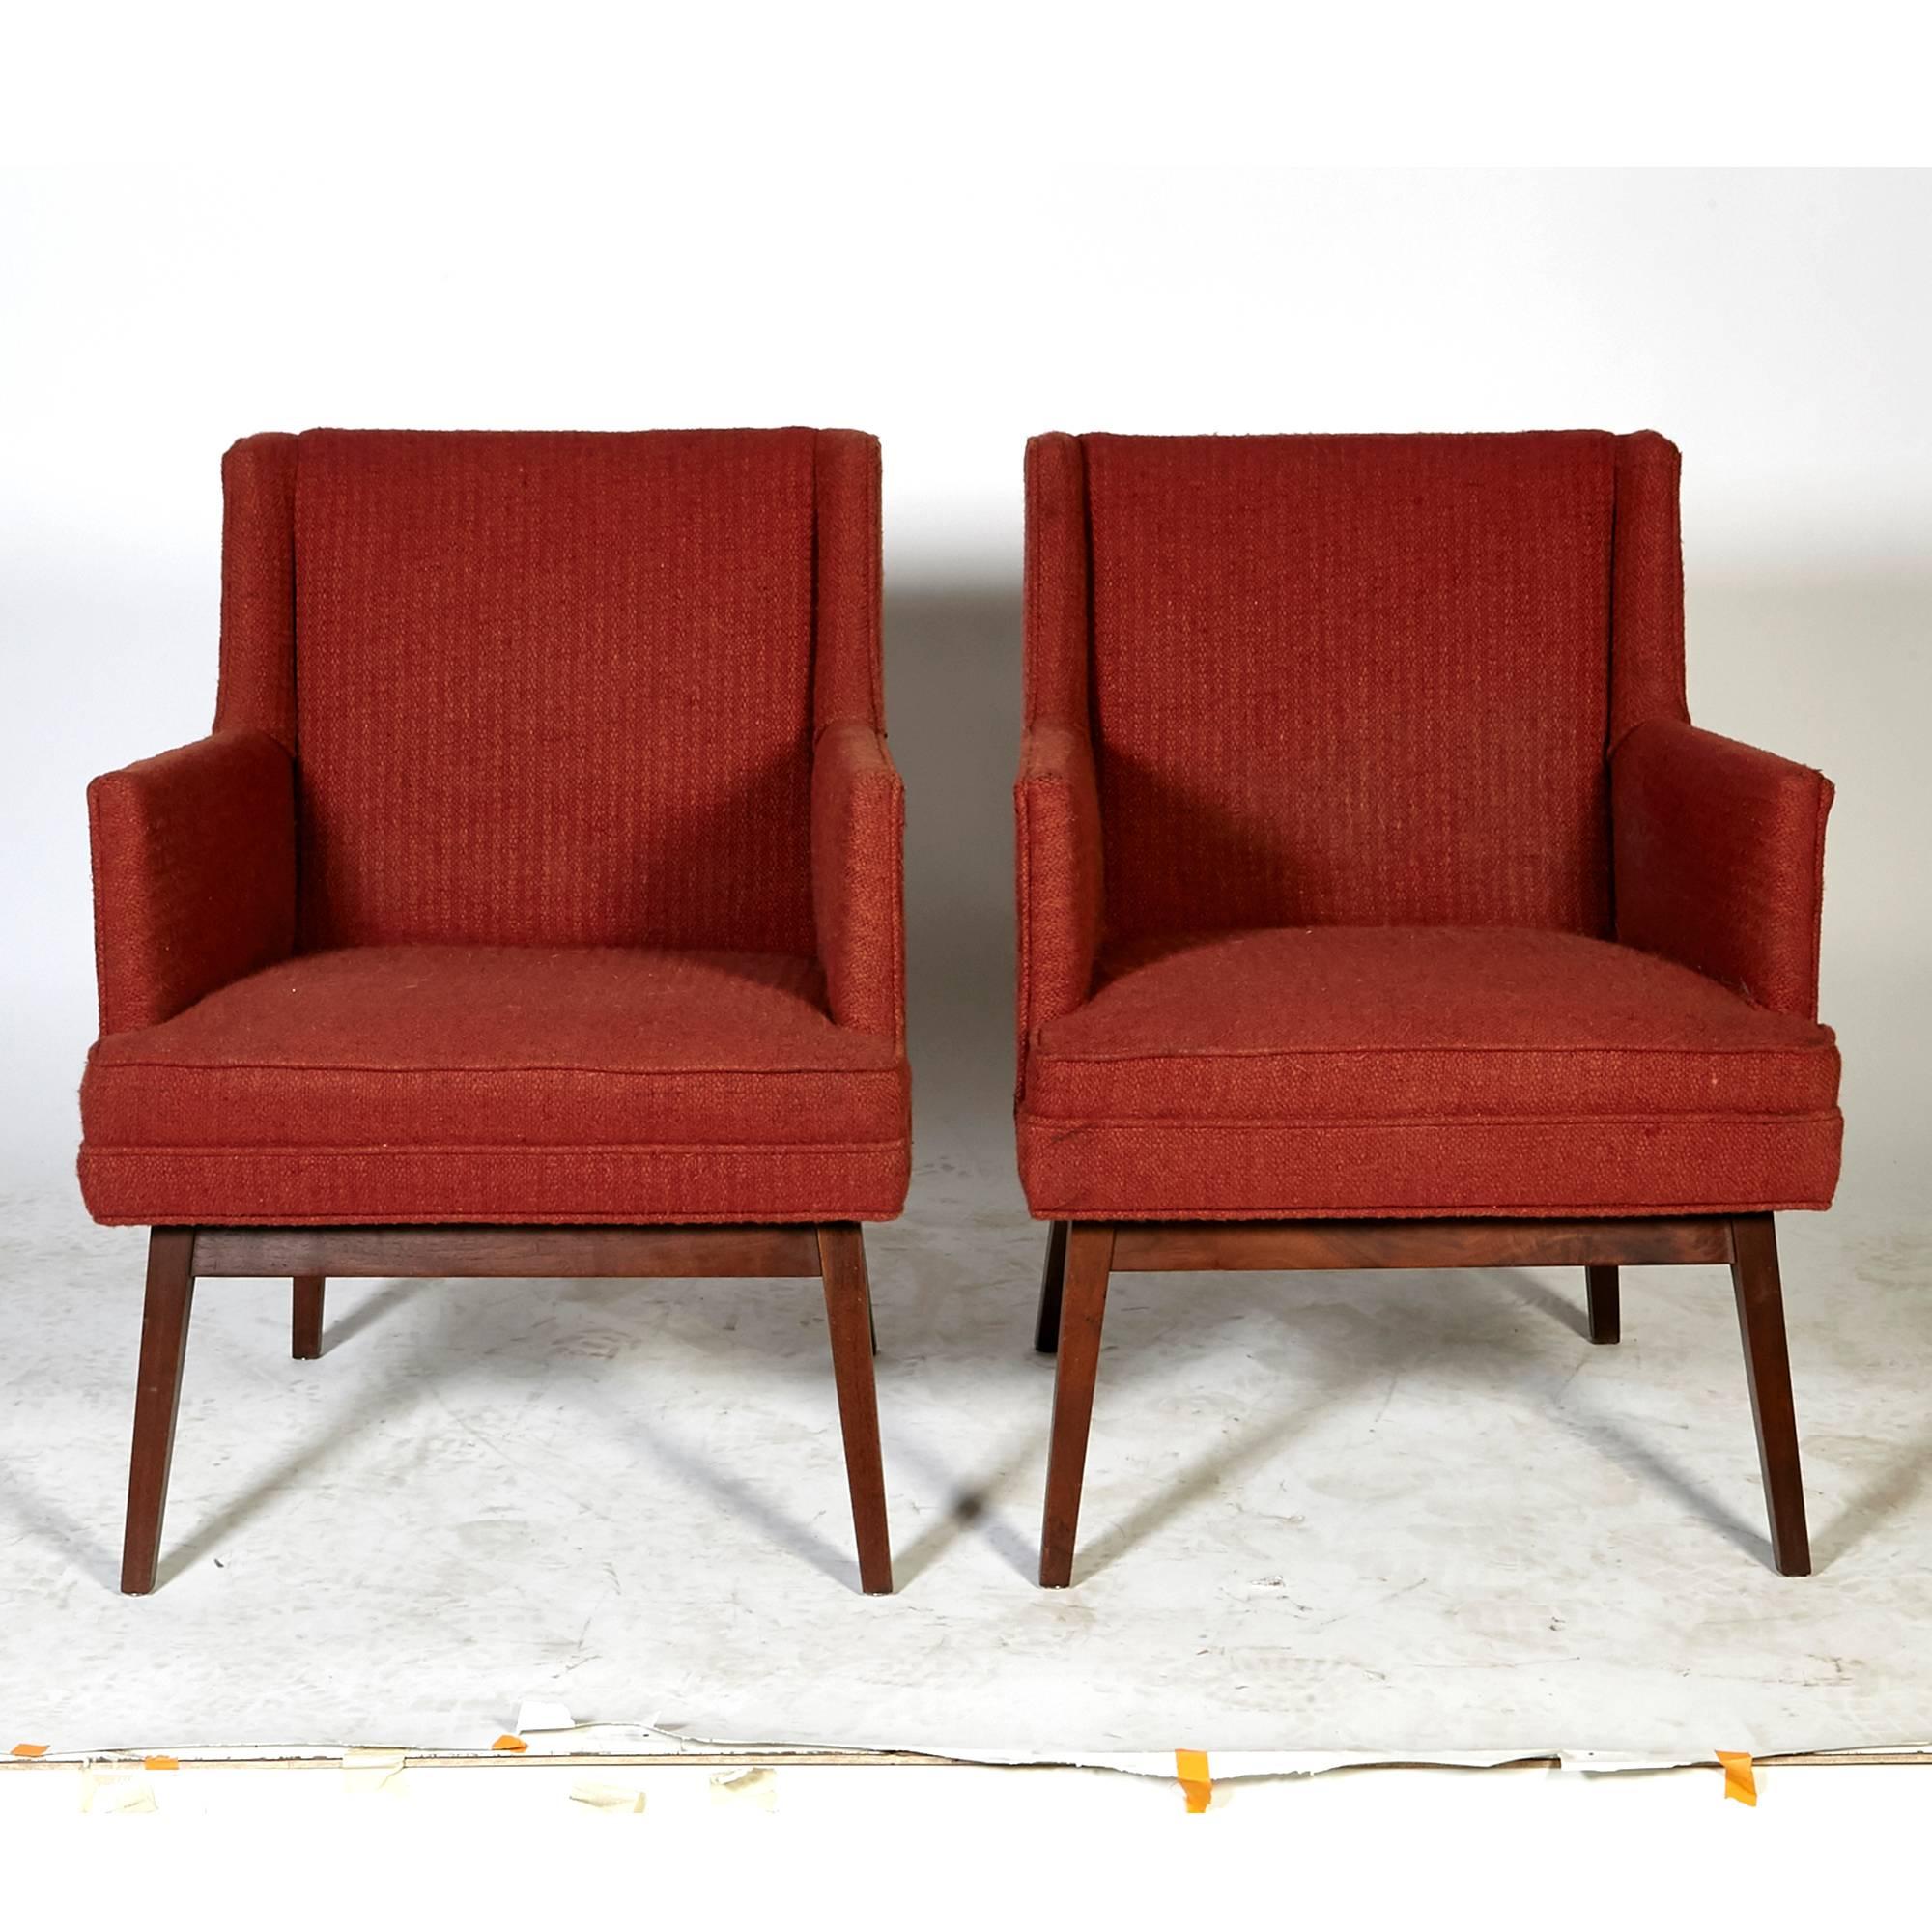 Mid-Century Modern Jens Risom-Style Walnut Frame Lounge Chairs, Pair For Sale